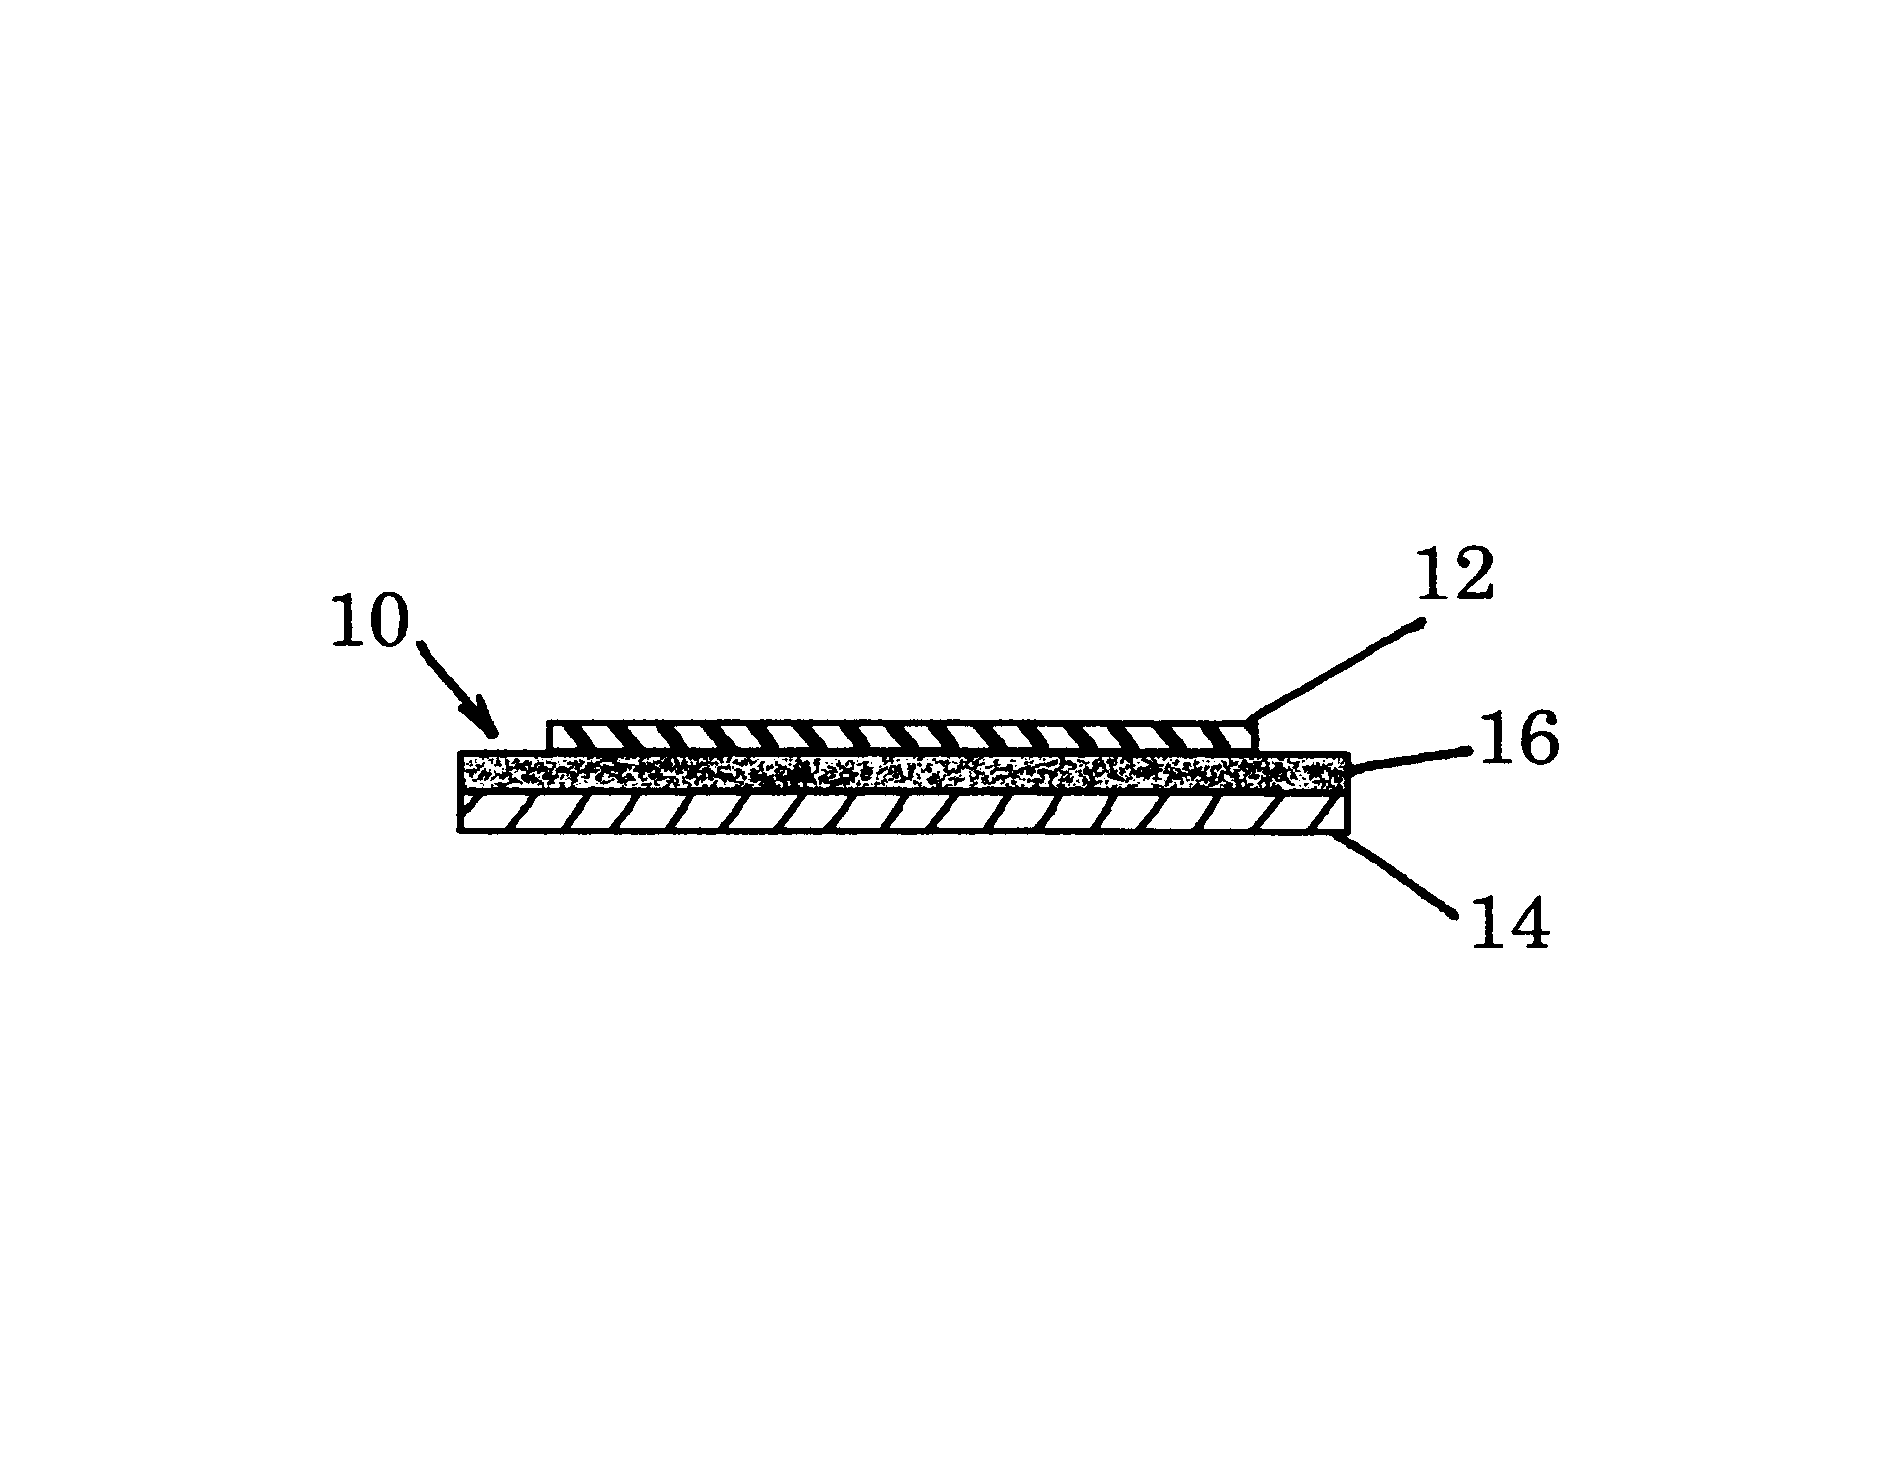 Thin-coat metal oxide electrode for an electrochemical capacitor